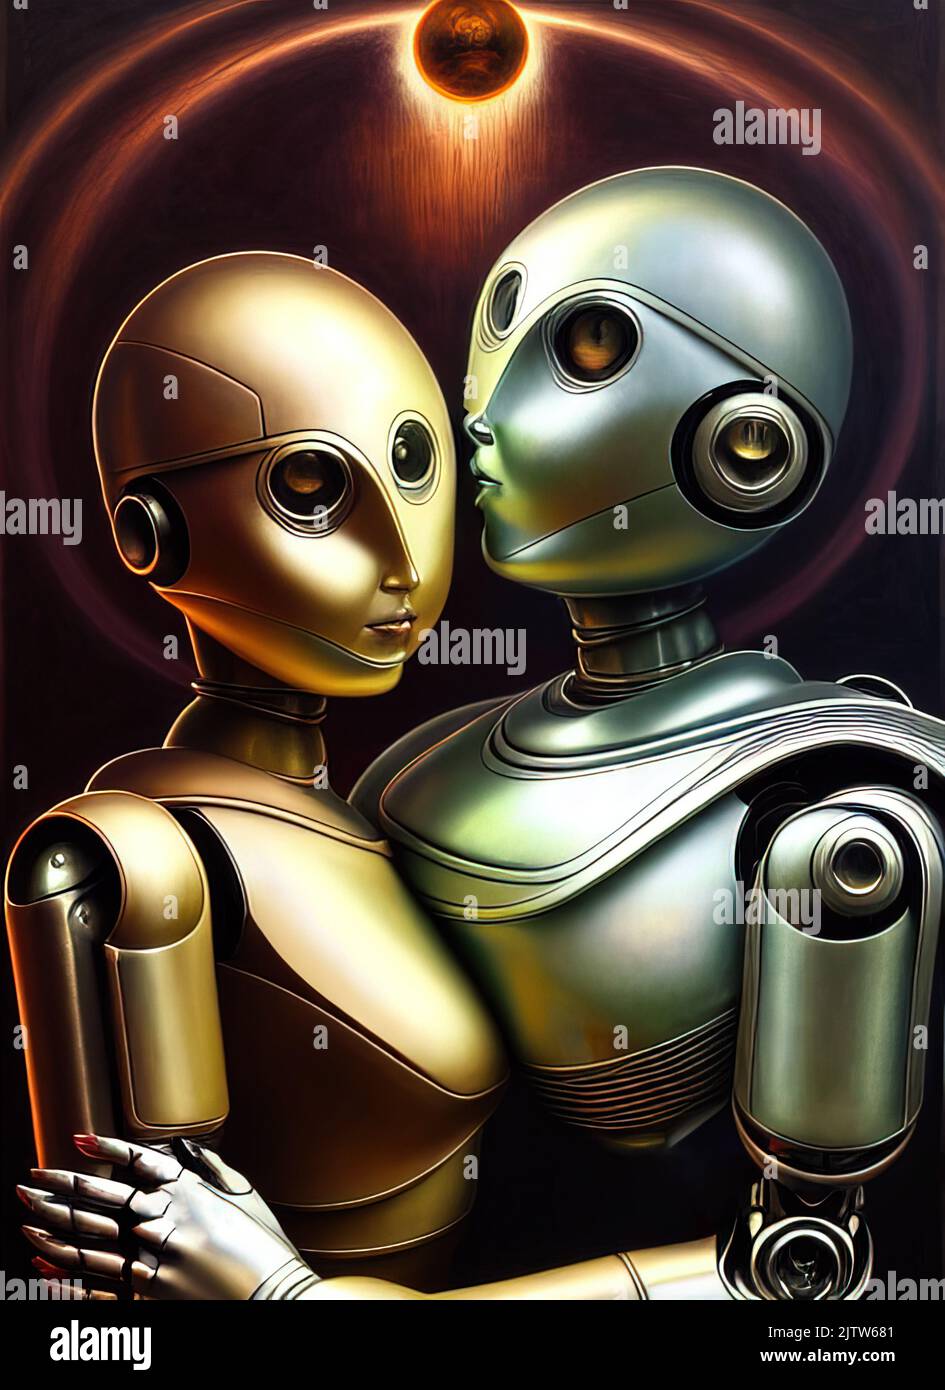 Humanoid androids robots couple embrace each other Stock Photo